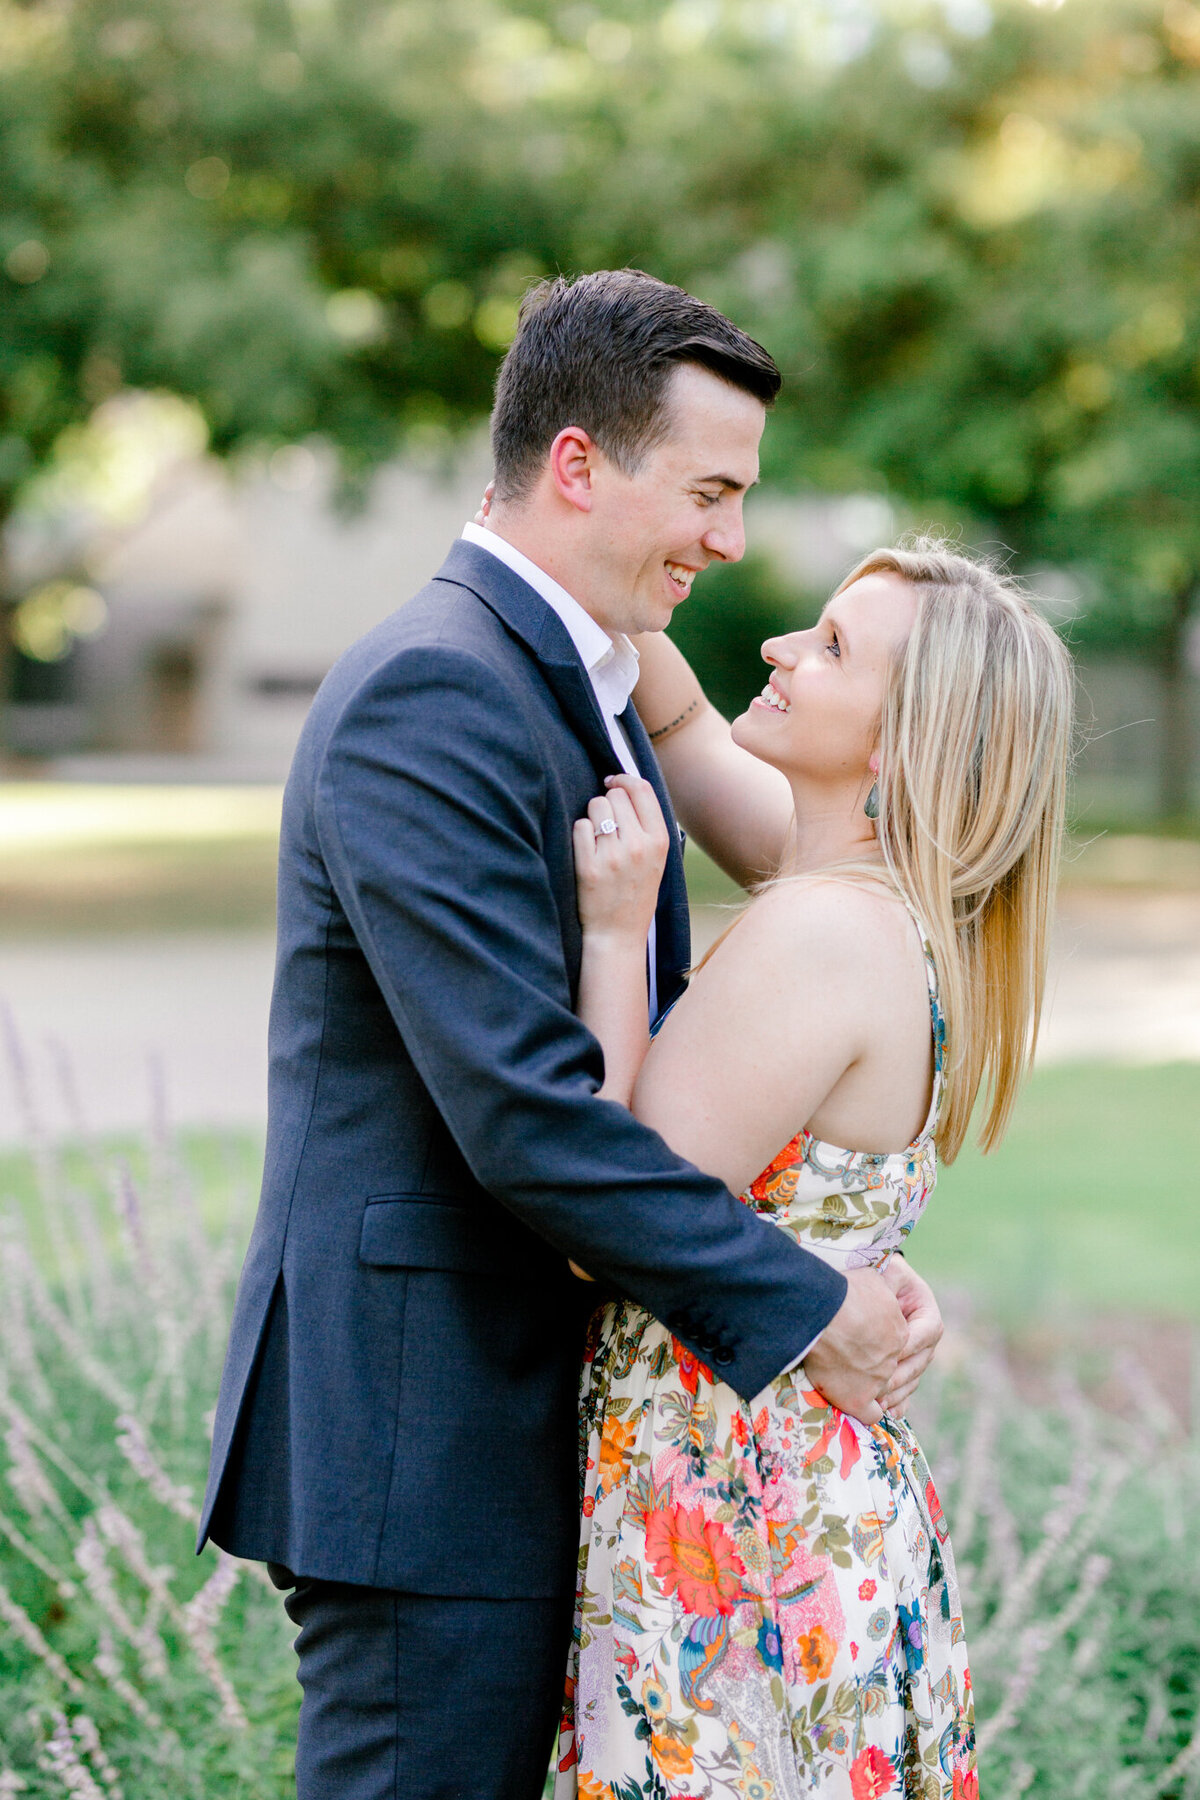 Montanna & KC Engagement Session at the Dallas Arts District | DFW Wedding Photographer | Sami Kathryn Photography-6